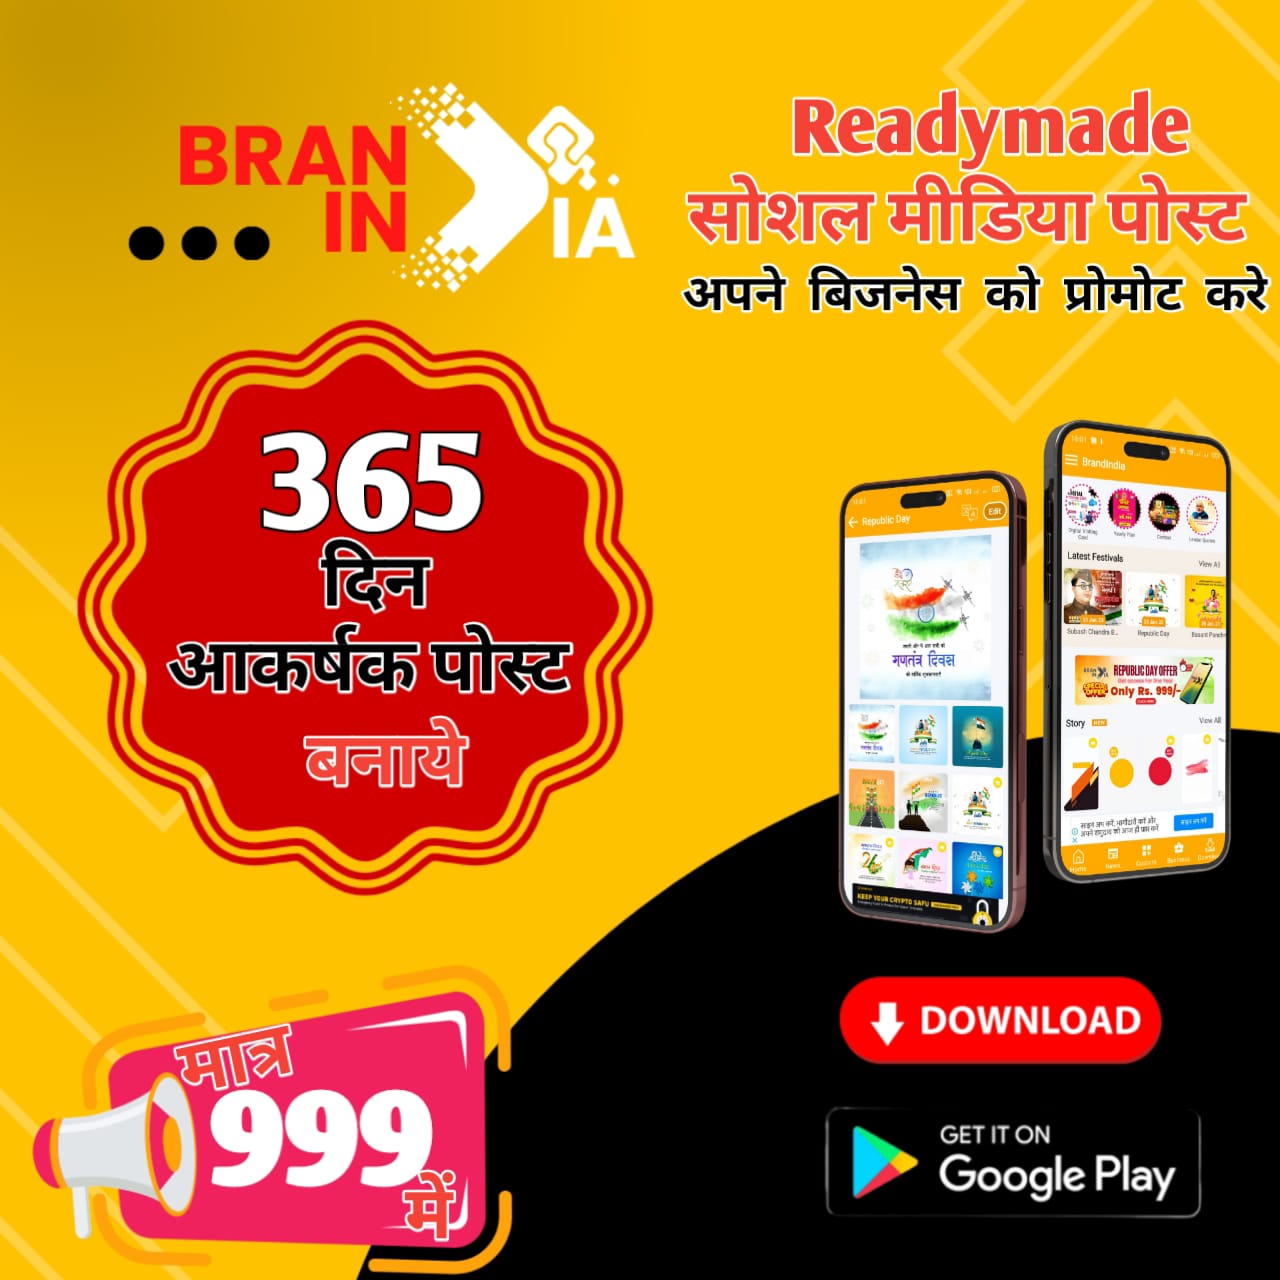 You are currently viewing BRANDINDIA APP